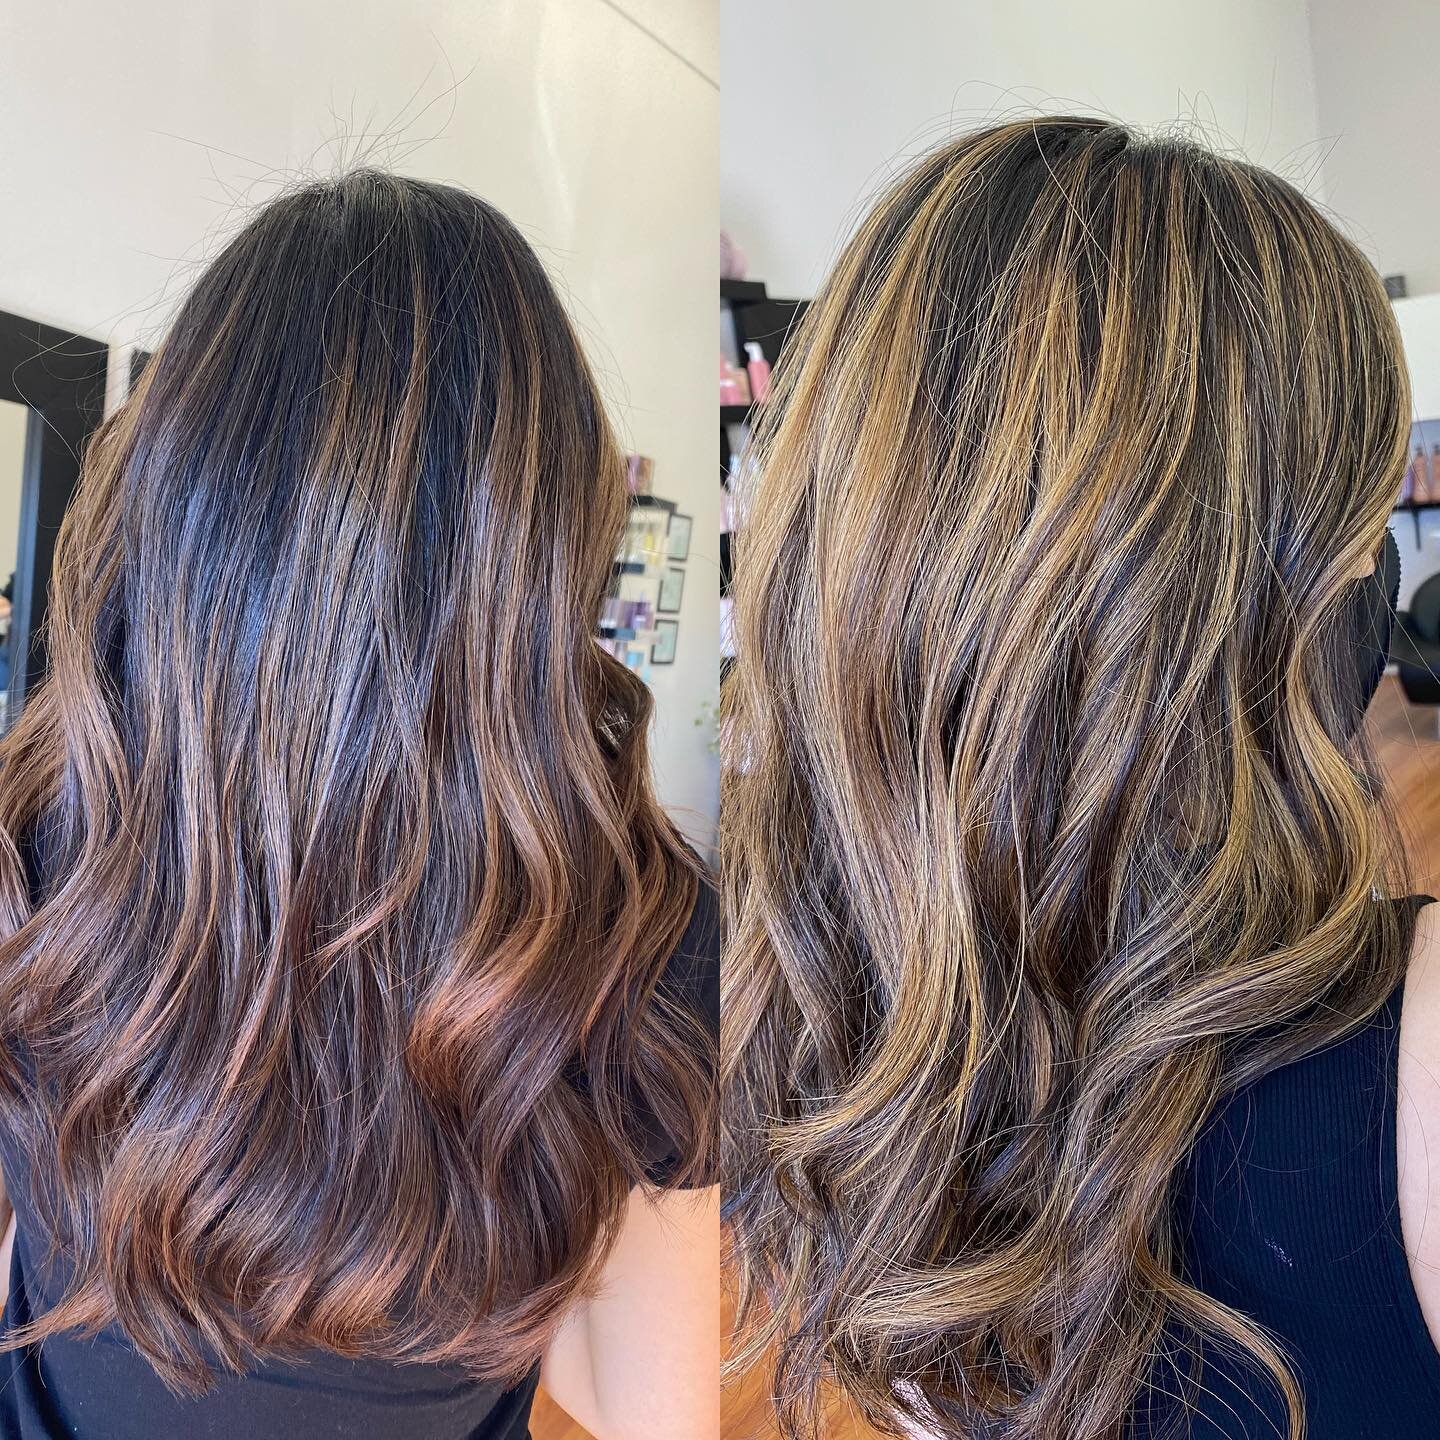 Beautiful hair is part of a #lifestyle 

We focus on creative ways to maintain  and update your colour. Check out this balayage updated for the #season 
Change doesn&rsquo;t  always have to be dramatic to make an impact. 

#colourbarlc #effortlesschi